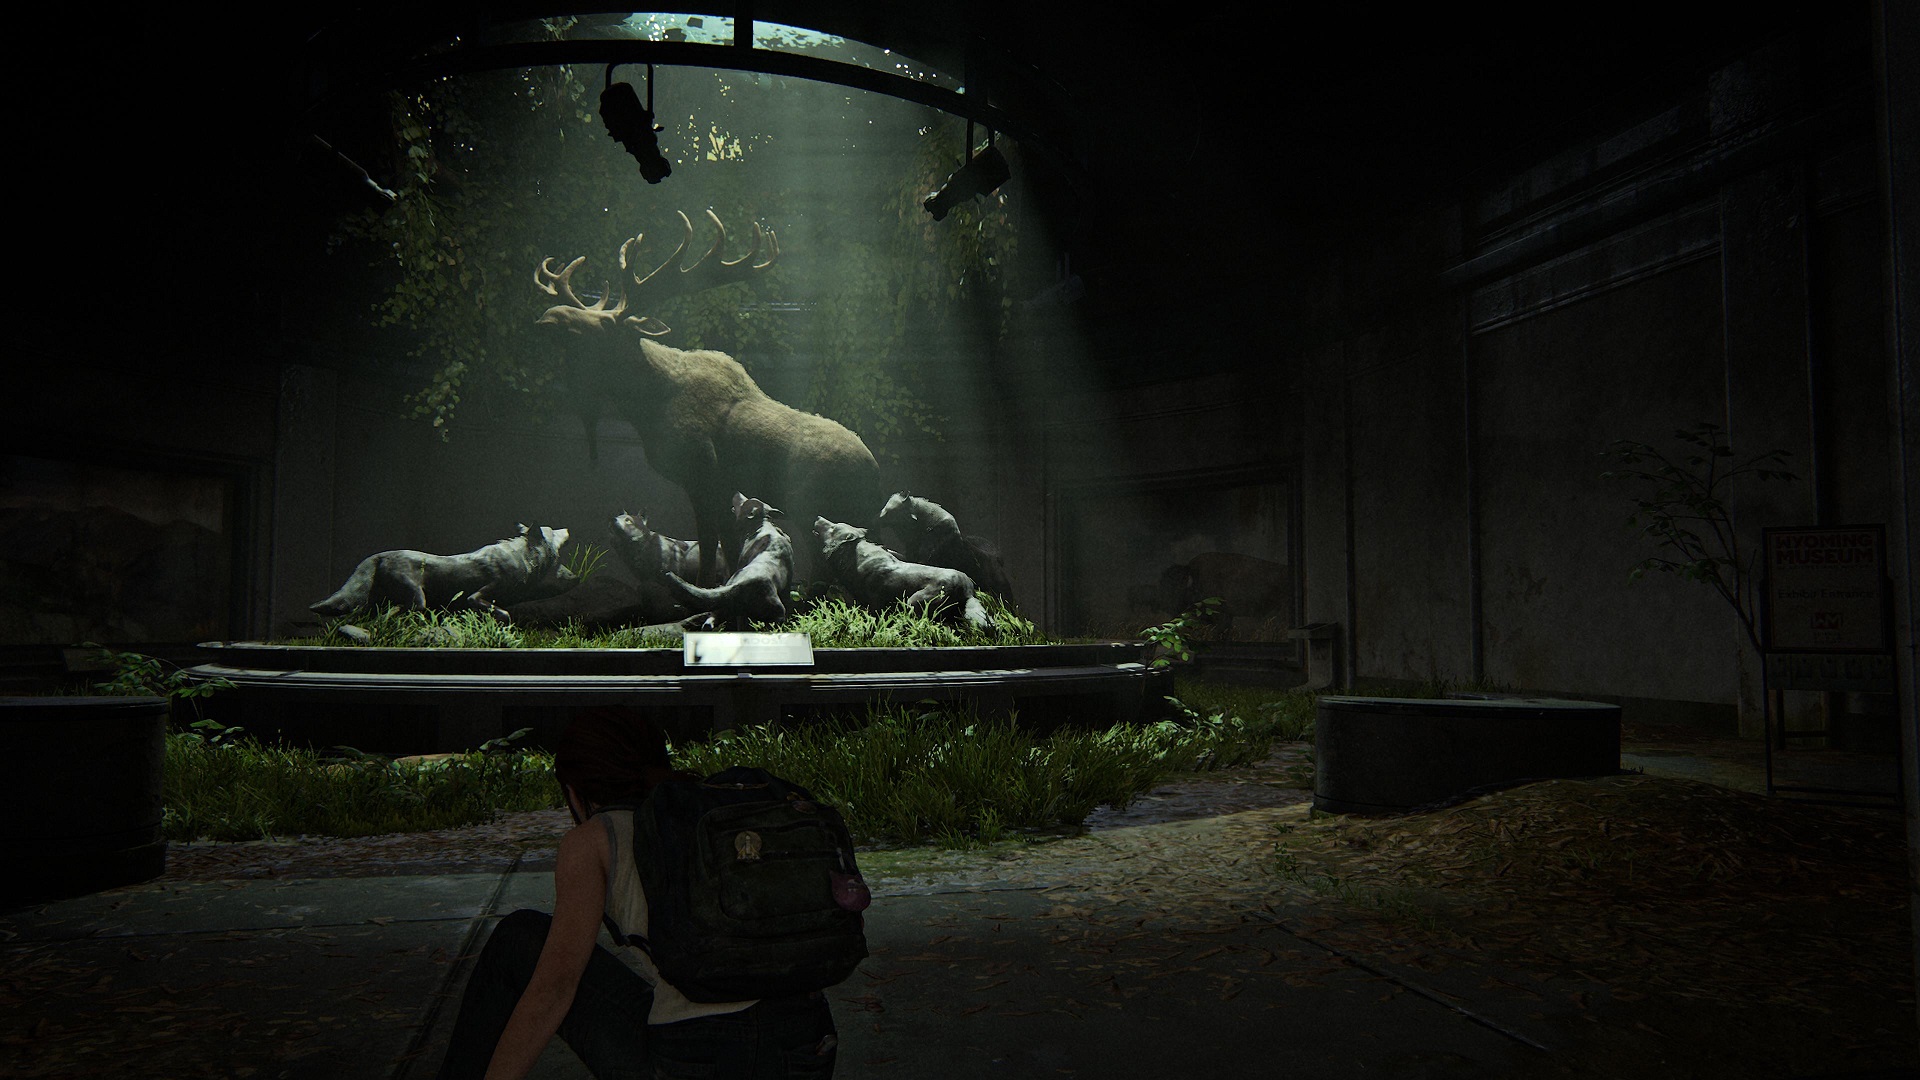 The player crouches observing a large museum display with a moose being attacked by a pack of wolves